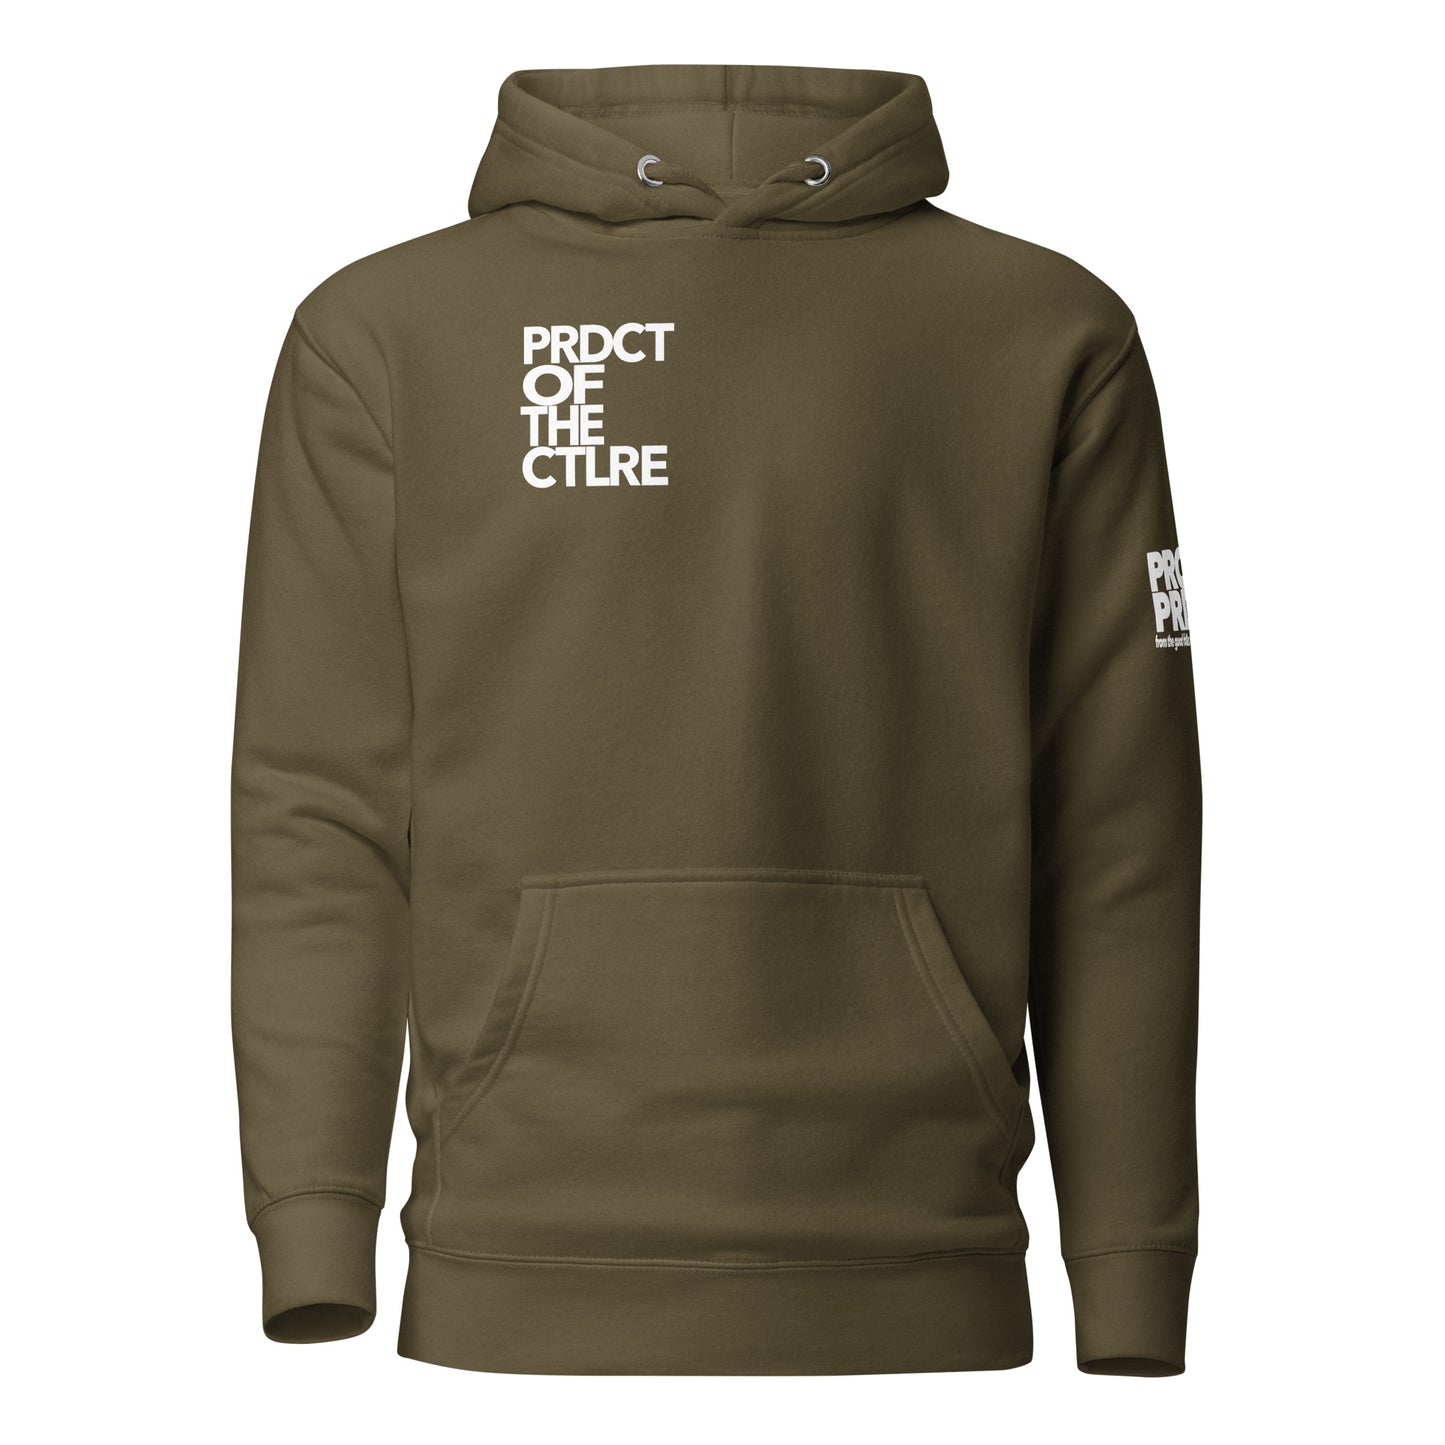 "Product of the Culture" Hoodie